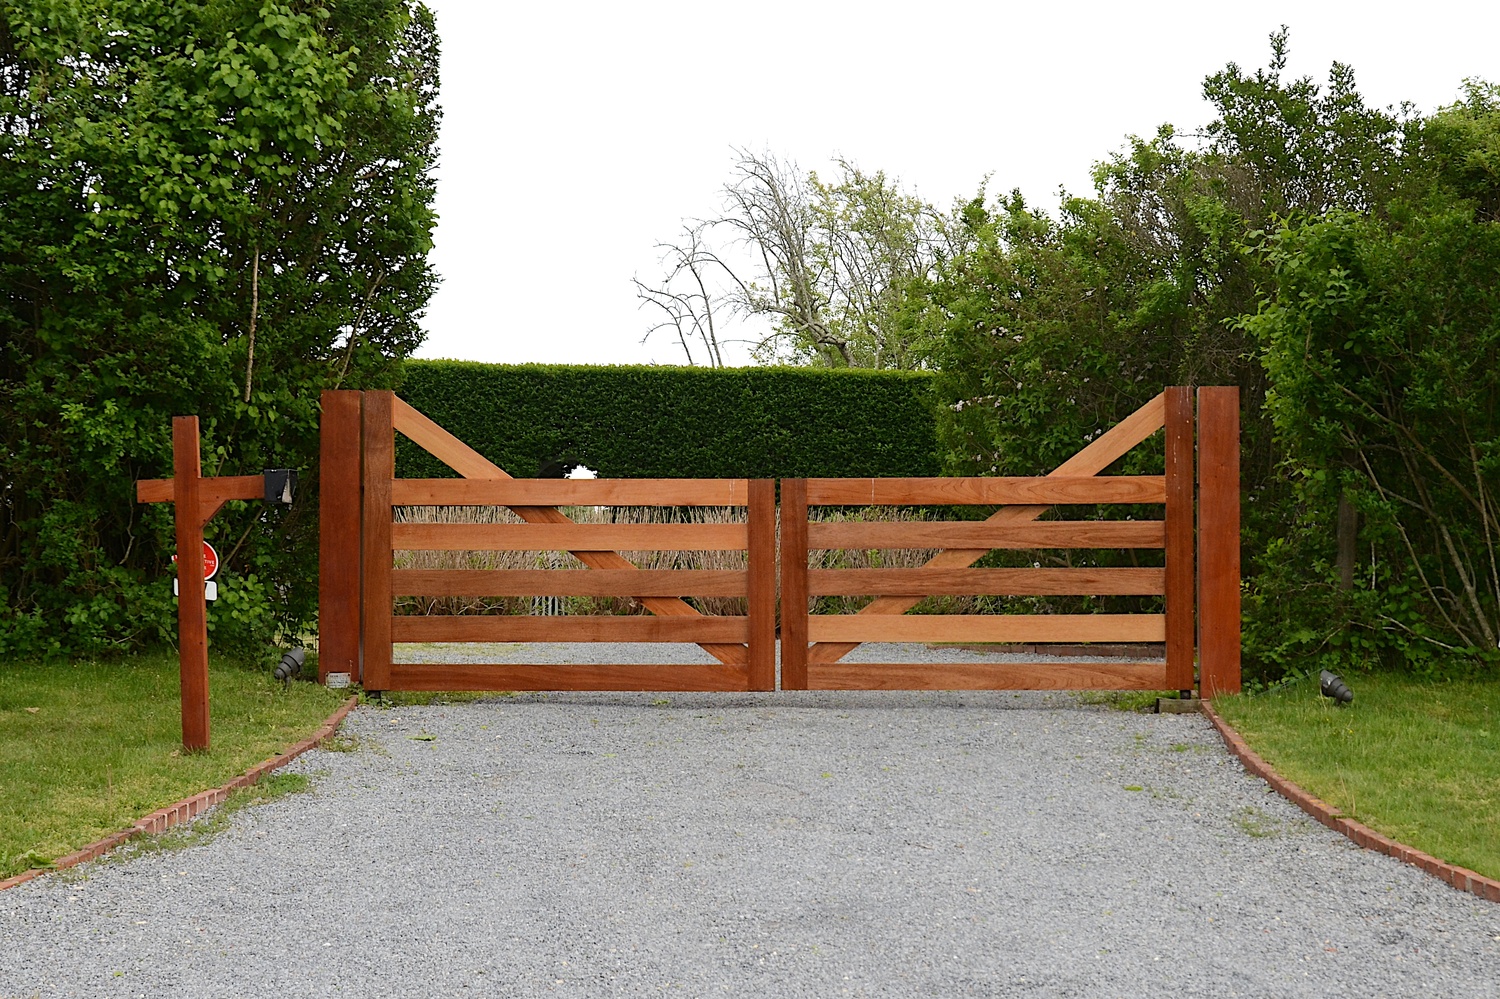 The question of whether to ban driveway gates in Sagaponack Village was debated at a public hearing on May 10. KYRIL BROMLEY